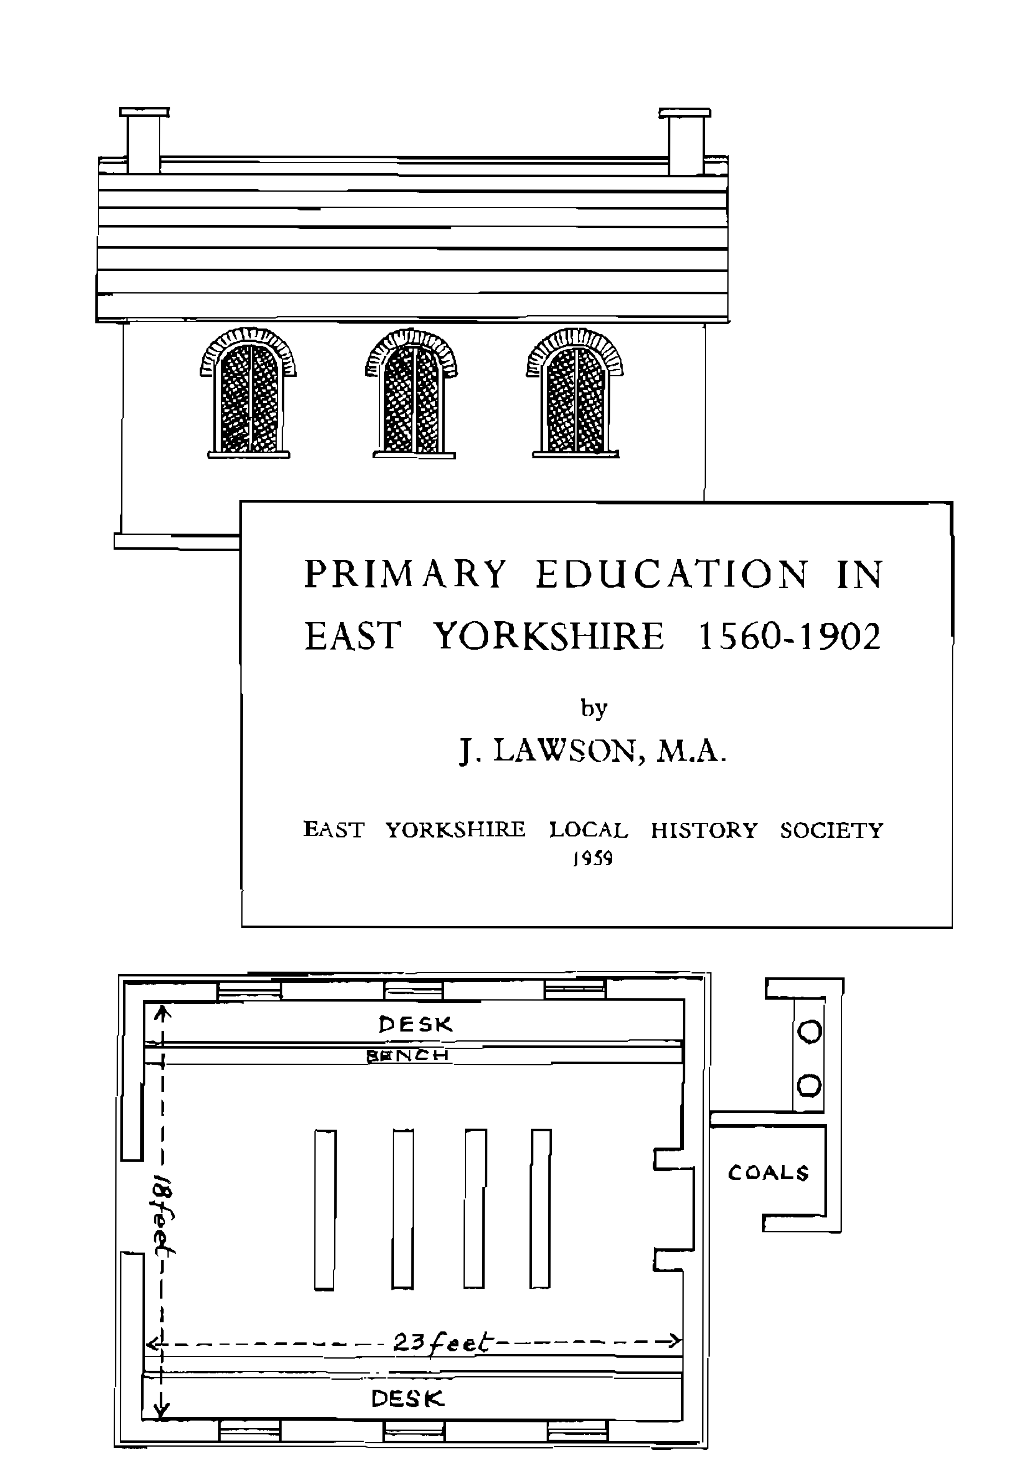 Primary Education in East Yorkshire 1560-1902